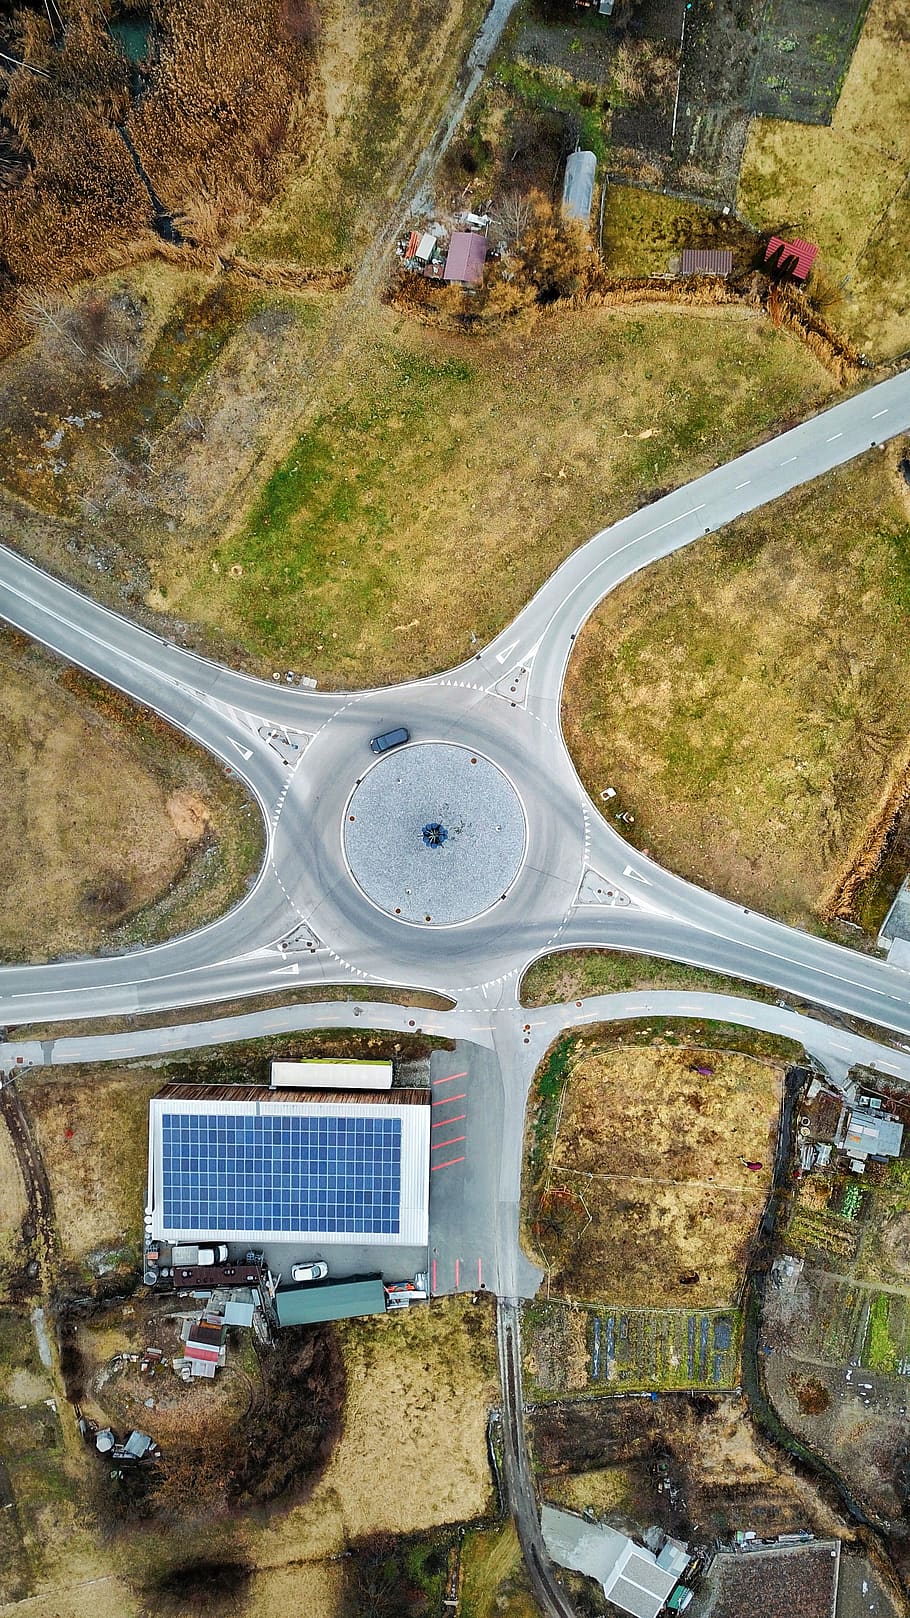 drone, traffic, roundabout, road, high angle view, transportation, day, land vehicle, car, mode of transportation